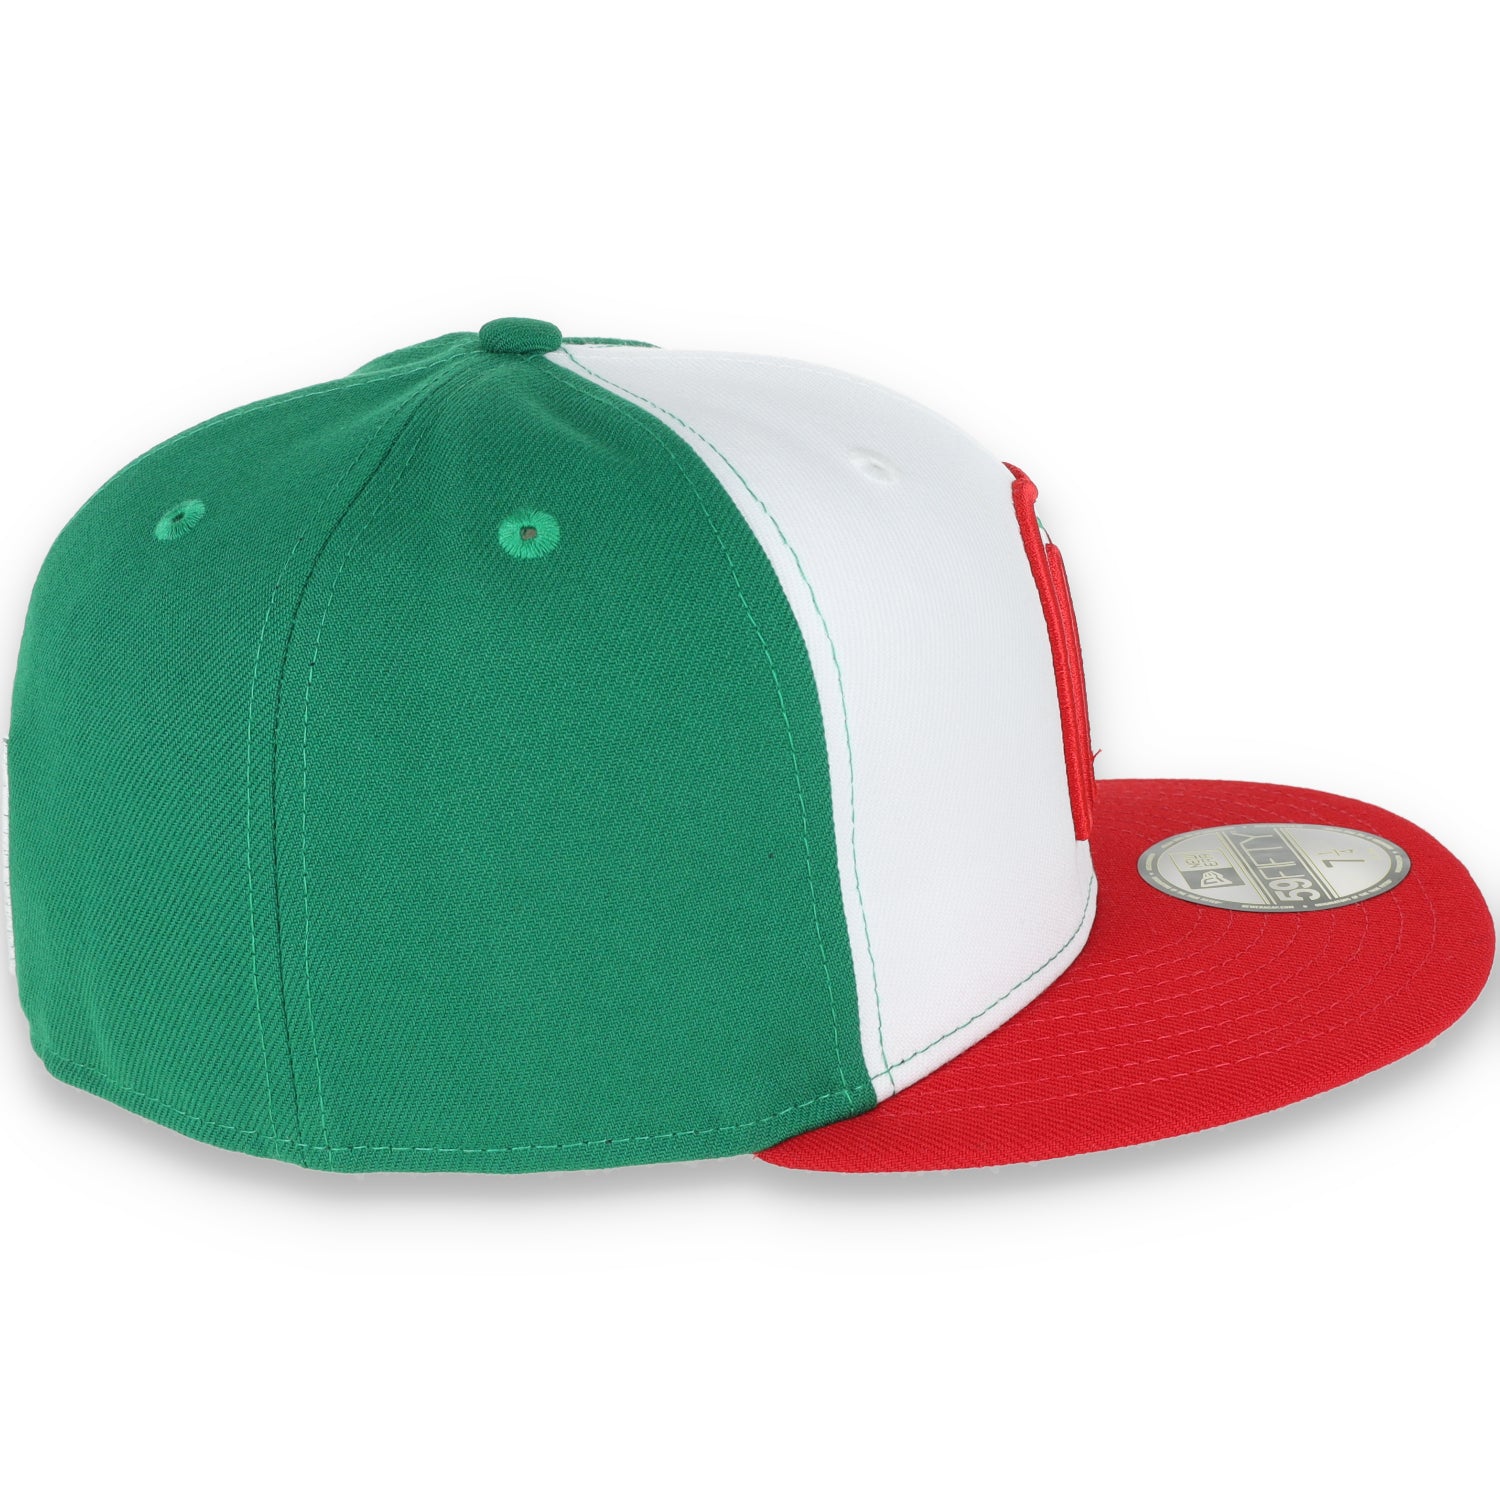 NEW ERA OFFICIAL WBC MEXICO 59FIFTY FITTED HAT-GREEN/RED/WHITE